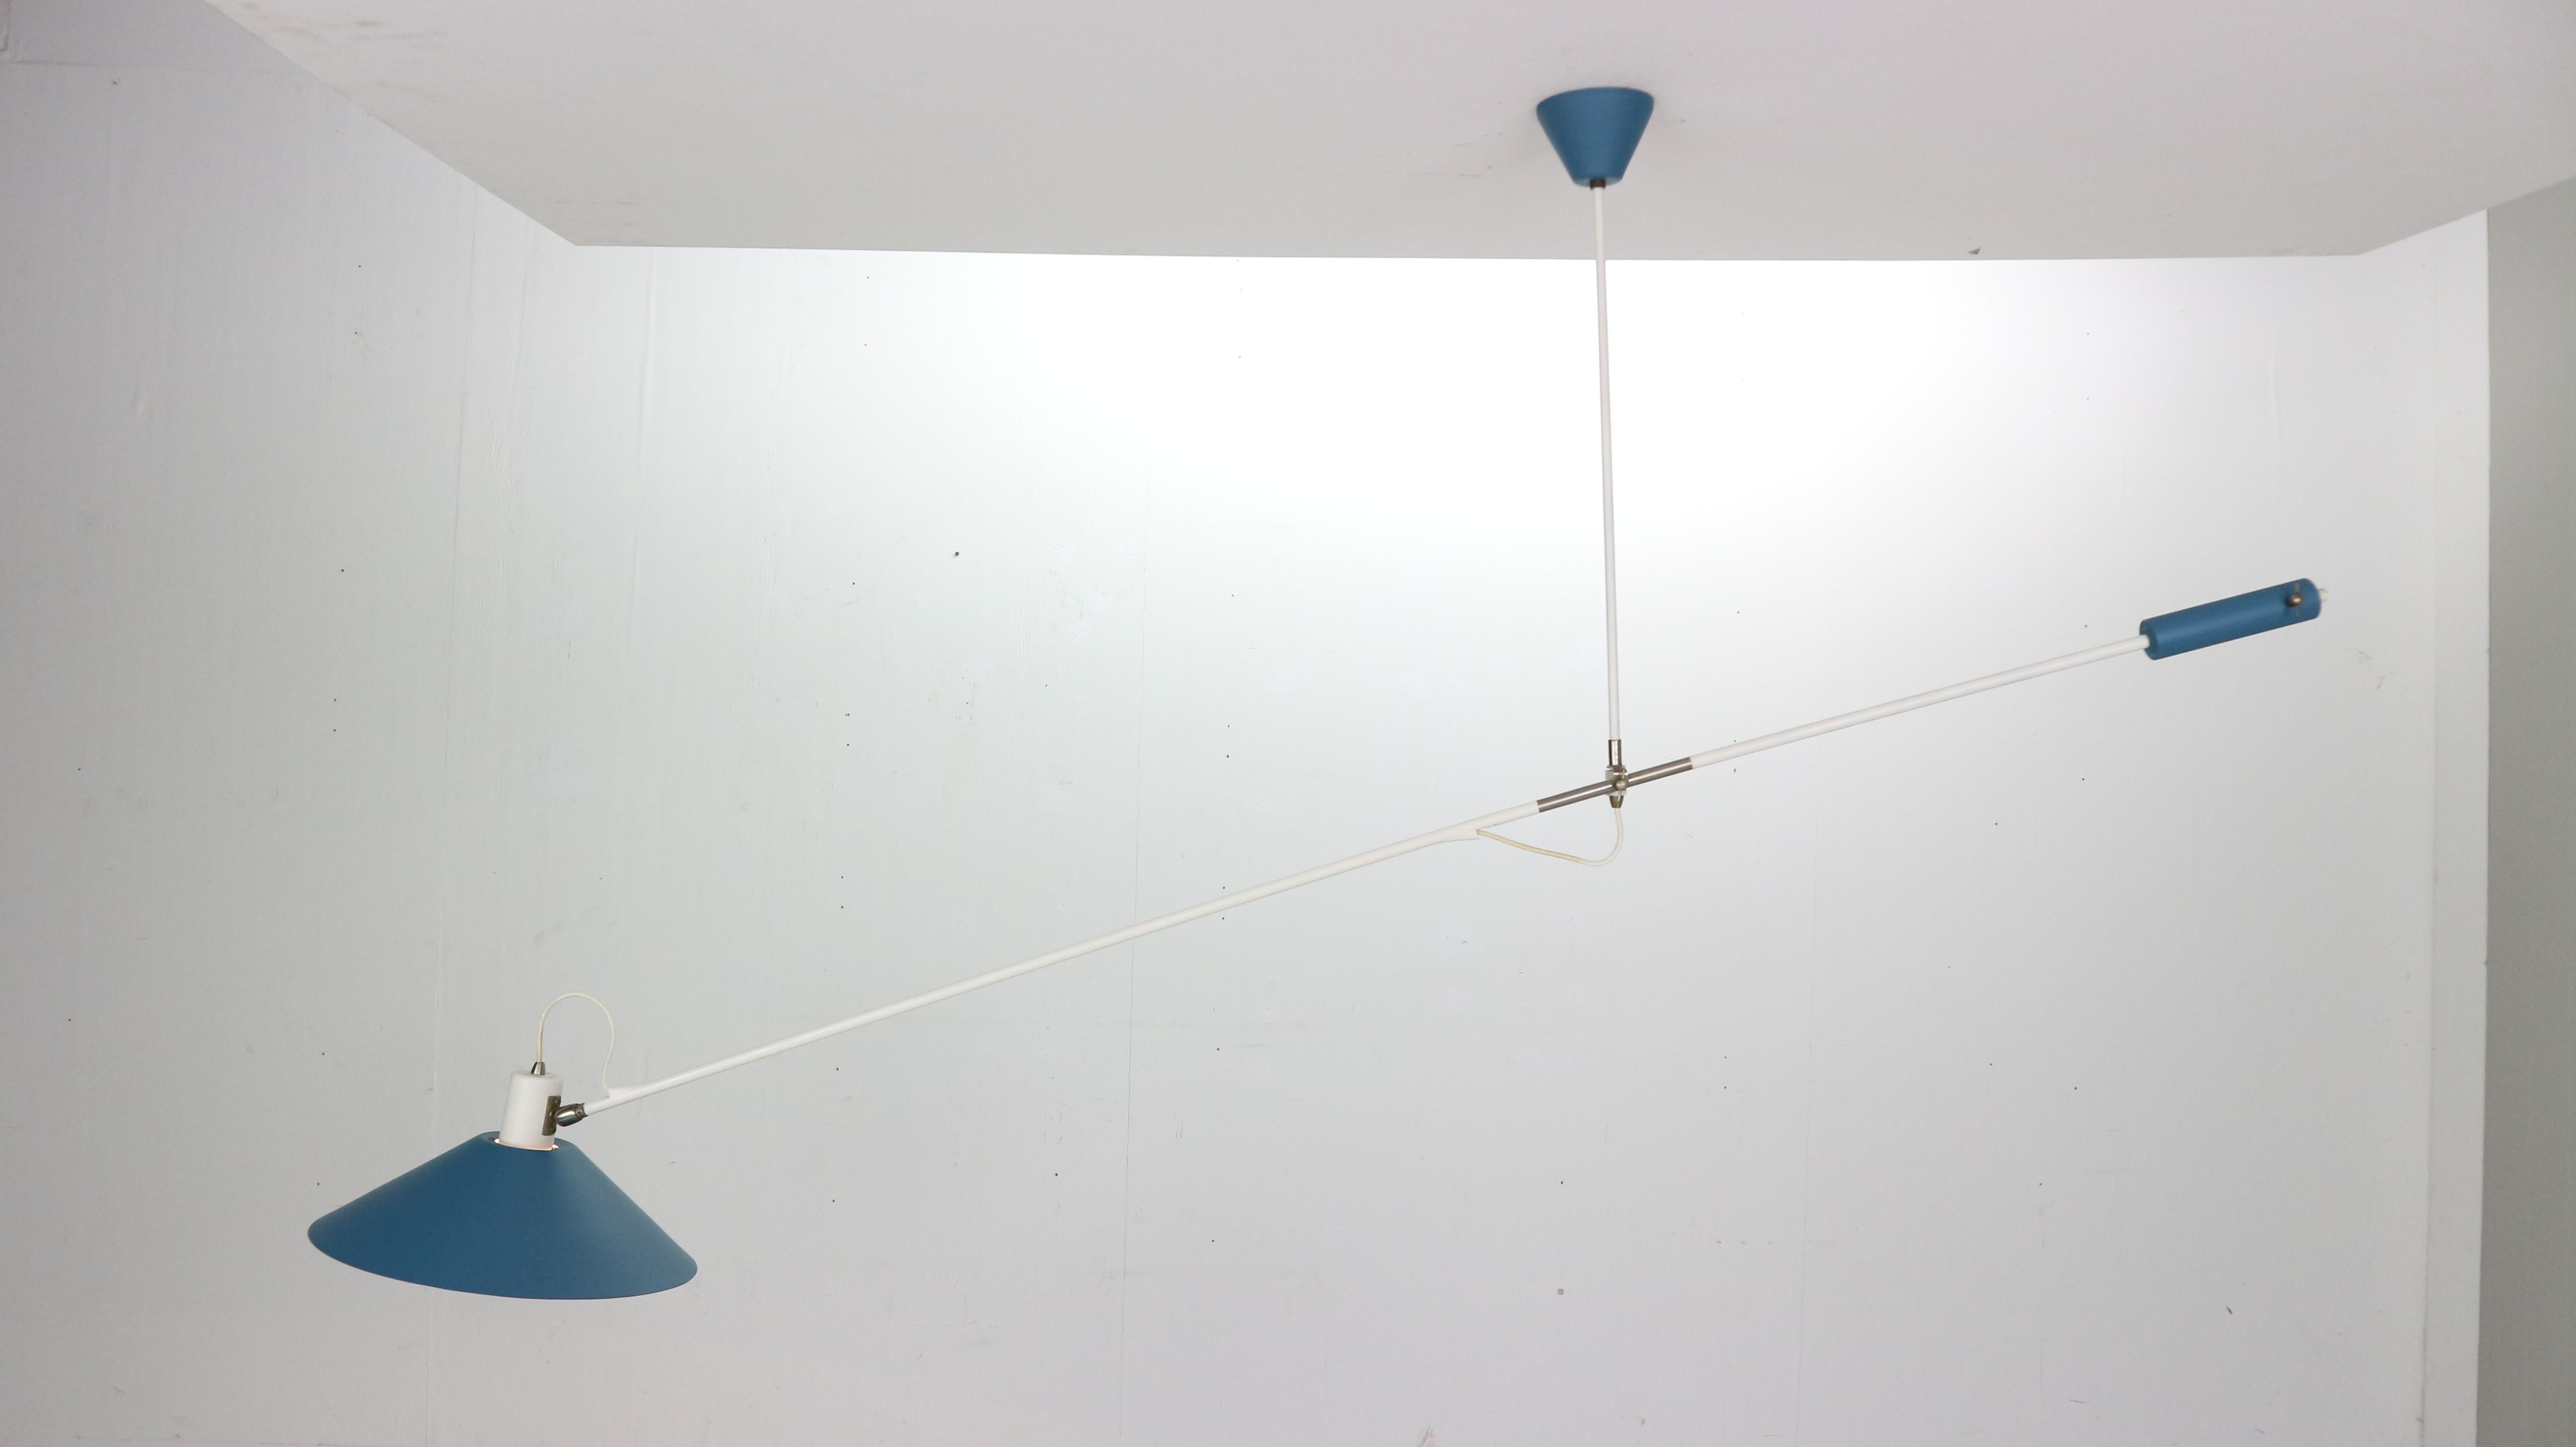 First edition sculptural counter balance ceiling lamp designed by JJM Hoogervorst for Anvia Almelo, Holland, 1957.
This amazing lamp has a white lacquered arm and blue lamp shade and its weight. The lamp balances in any wanted position by changing